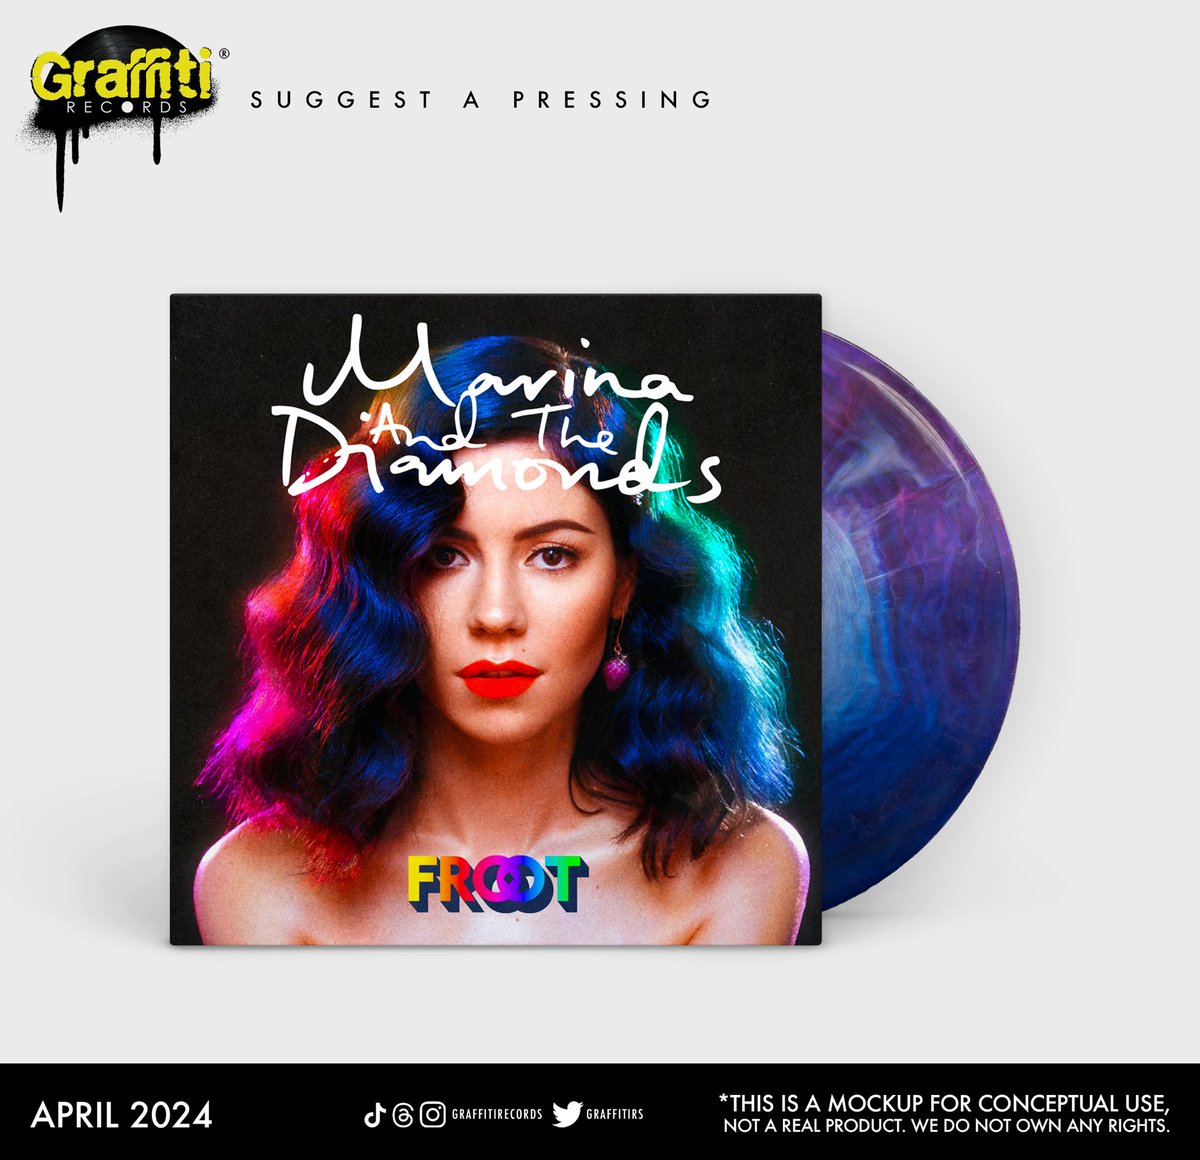 SUGGEST A PRESSING:
Marina & The Diamonds - FROOT

#marinaandthediamonds #froot #SuggestAPressing @MarinaDiamandis